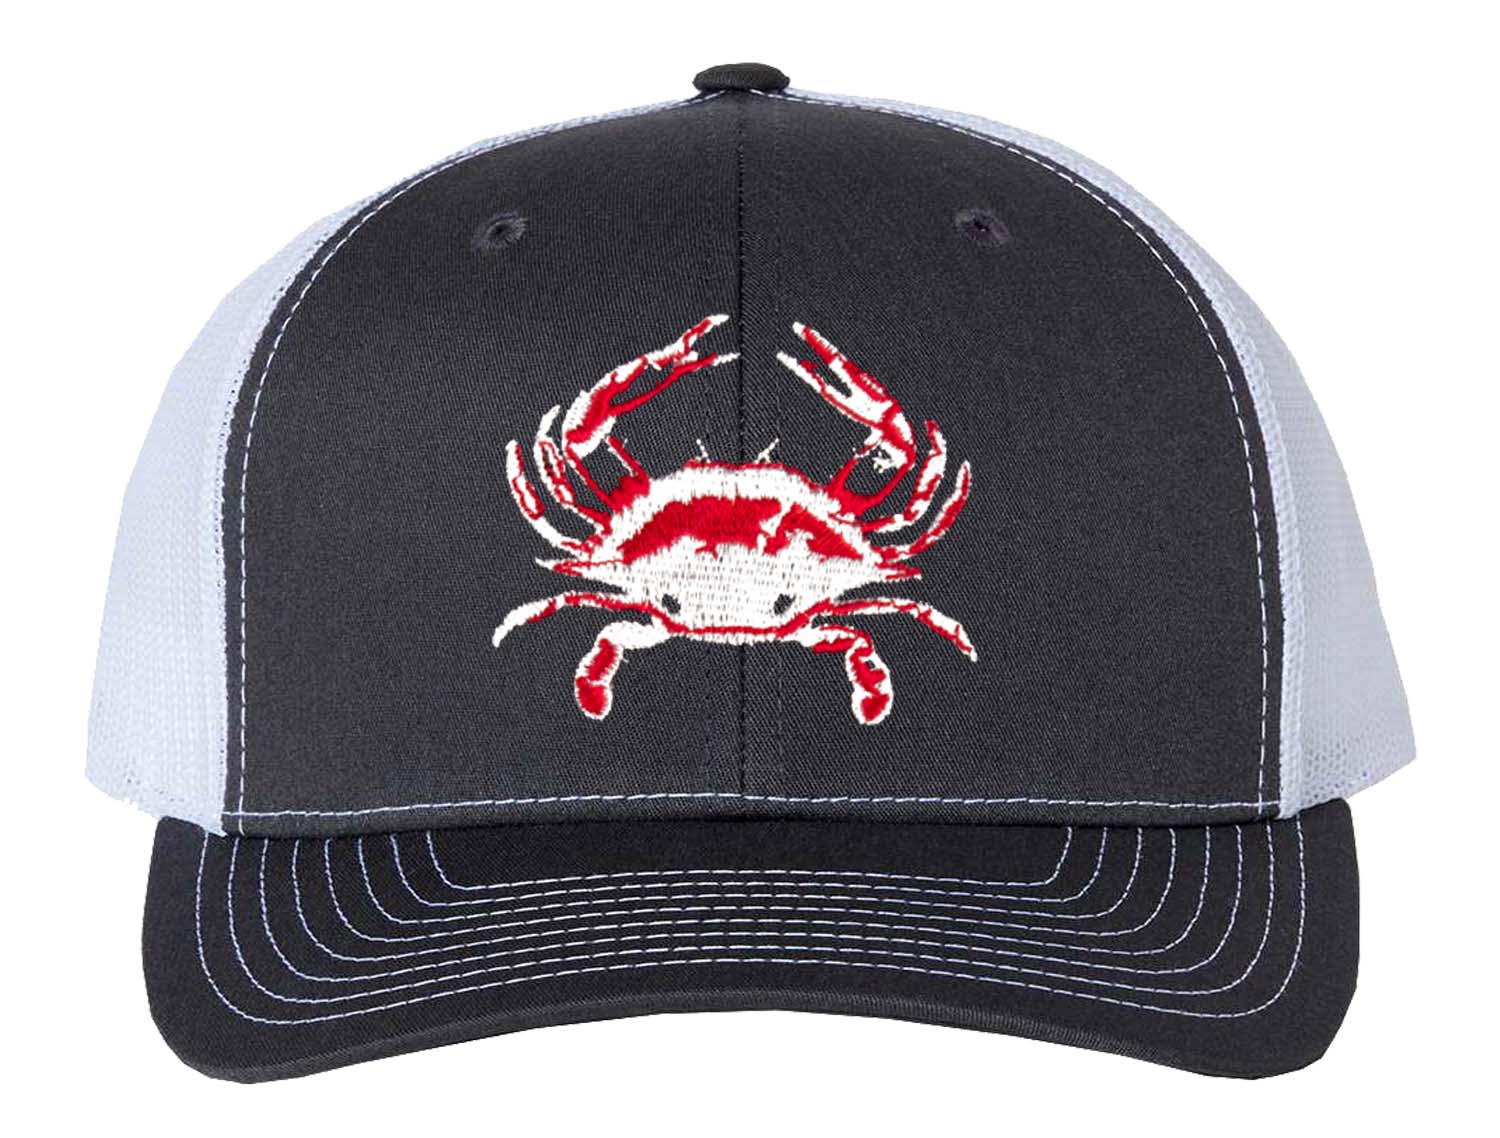 Blue Crab "Reel Crabby" Hat - Charcoal/White Mesh Structured Trucker Hat